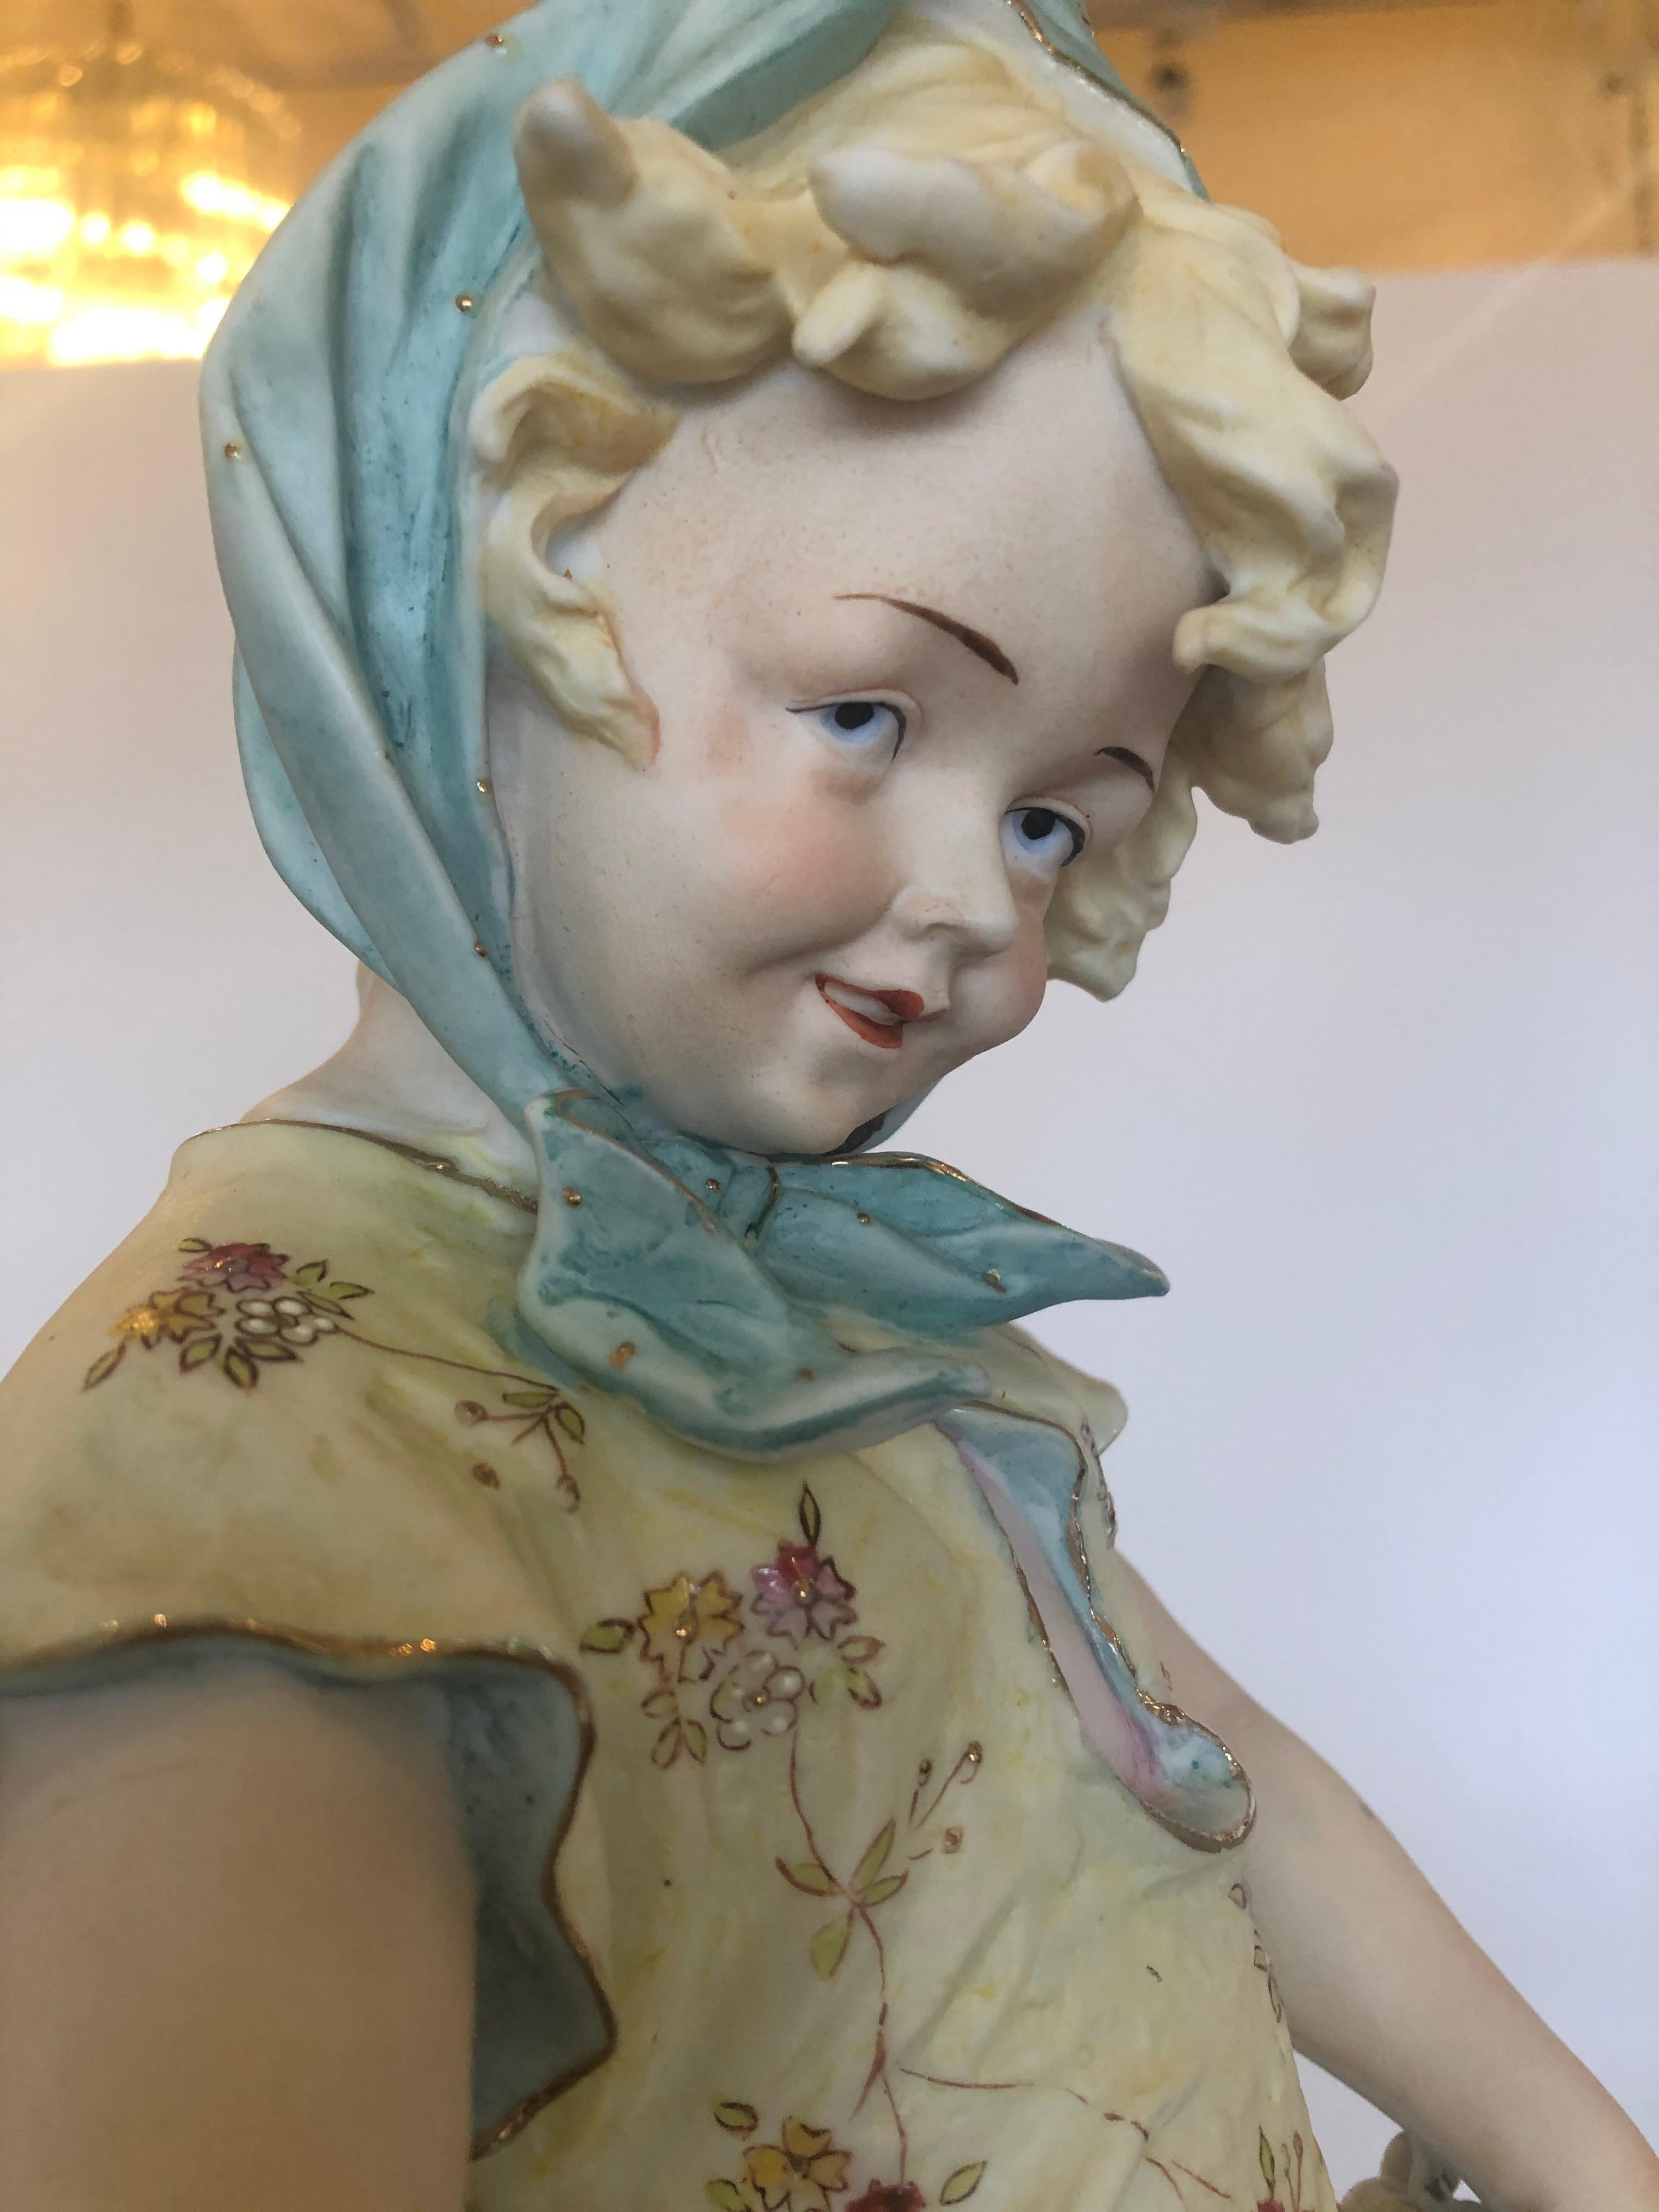 A tall meticulously detailed and hand painted parian porcelain figure of a country girl having blue bonnet and holding fruit in her apron. Signed on bottom.